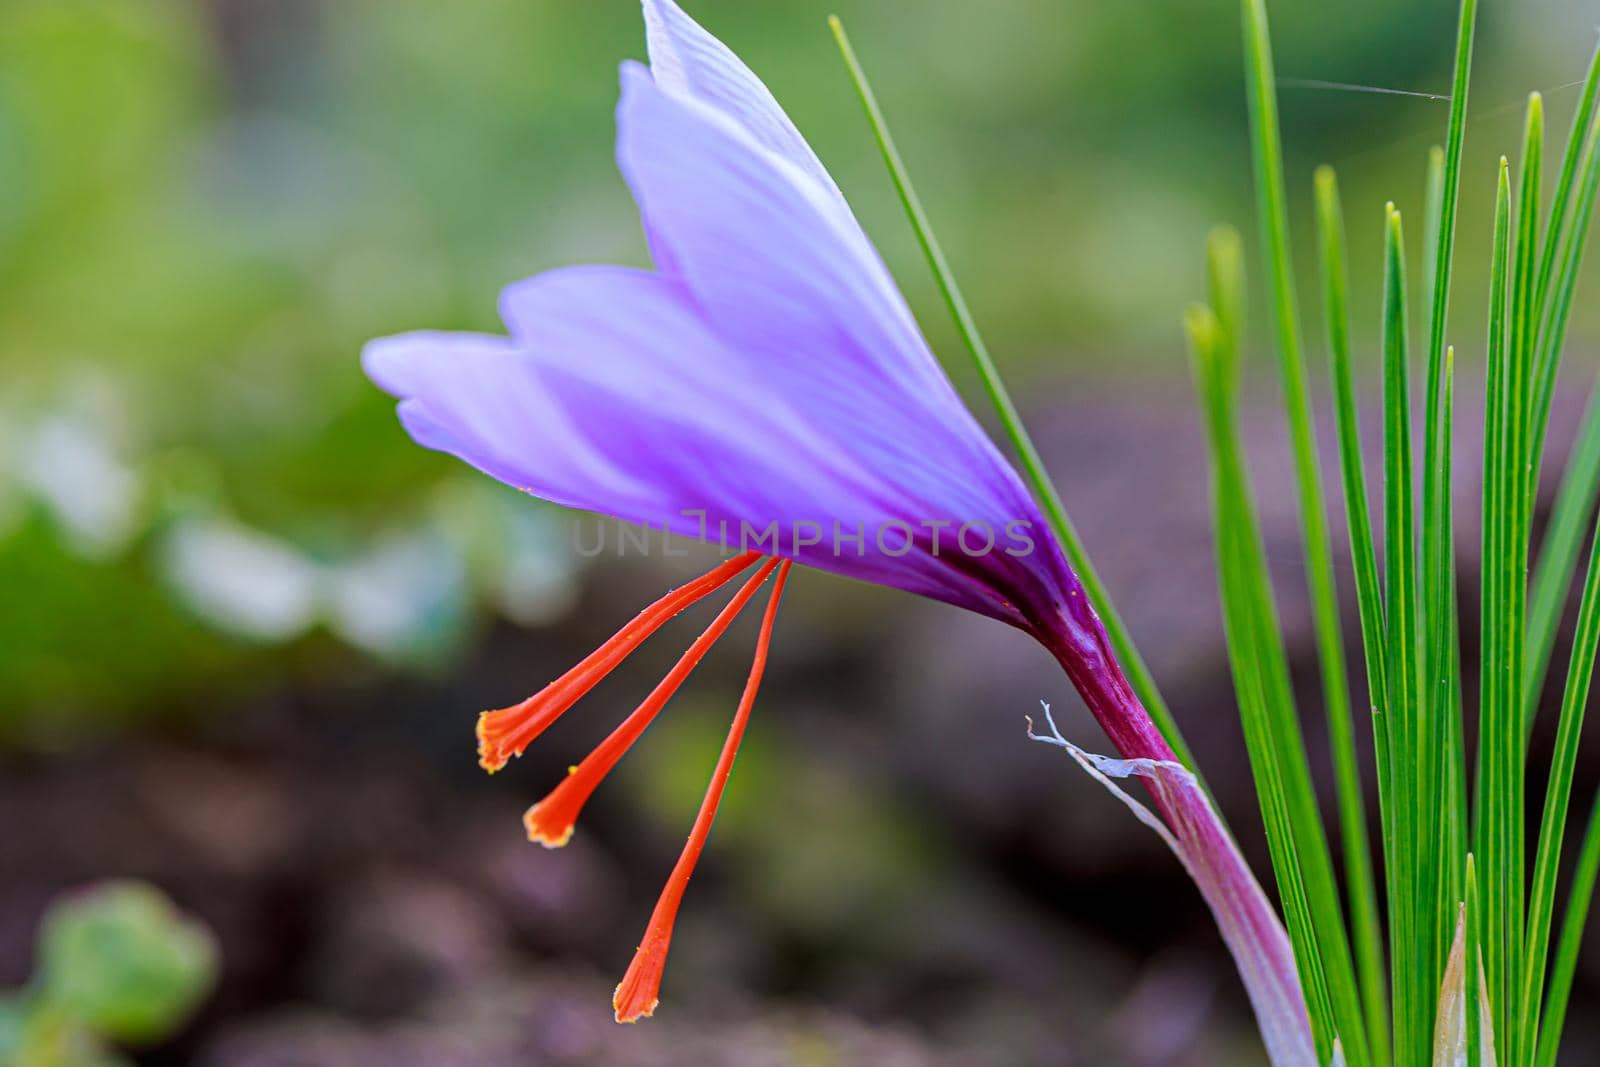 saffron crocus bloomed in the field, you can see the most expensive three stamens of saffron by Yaroslav